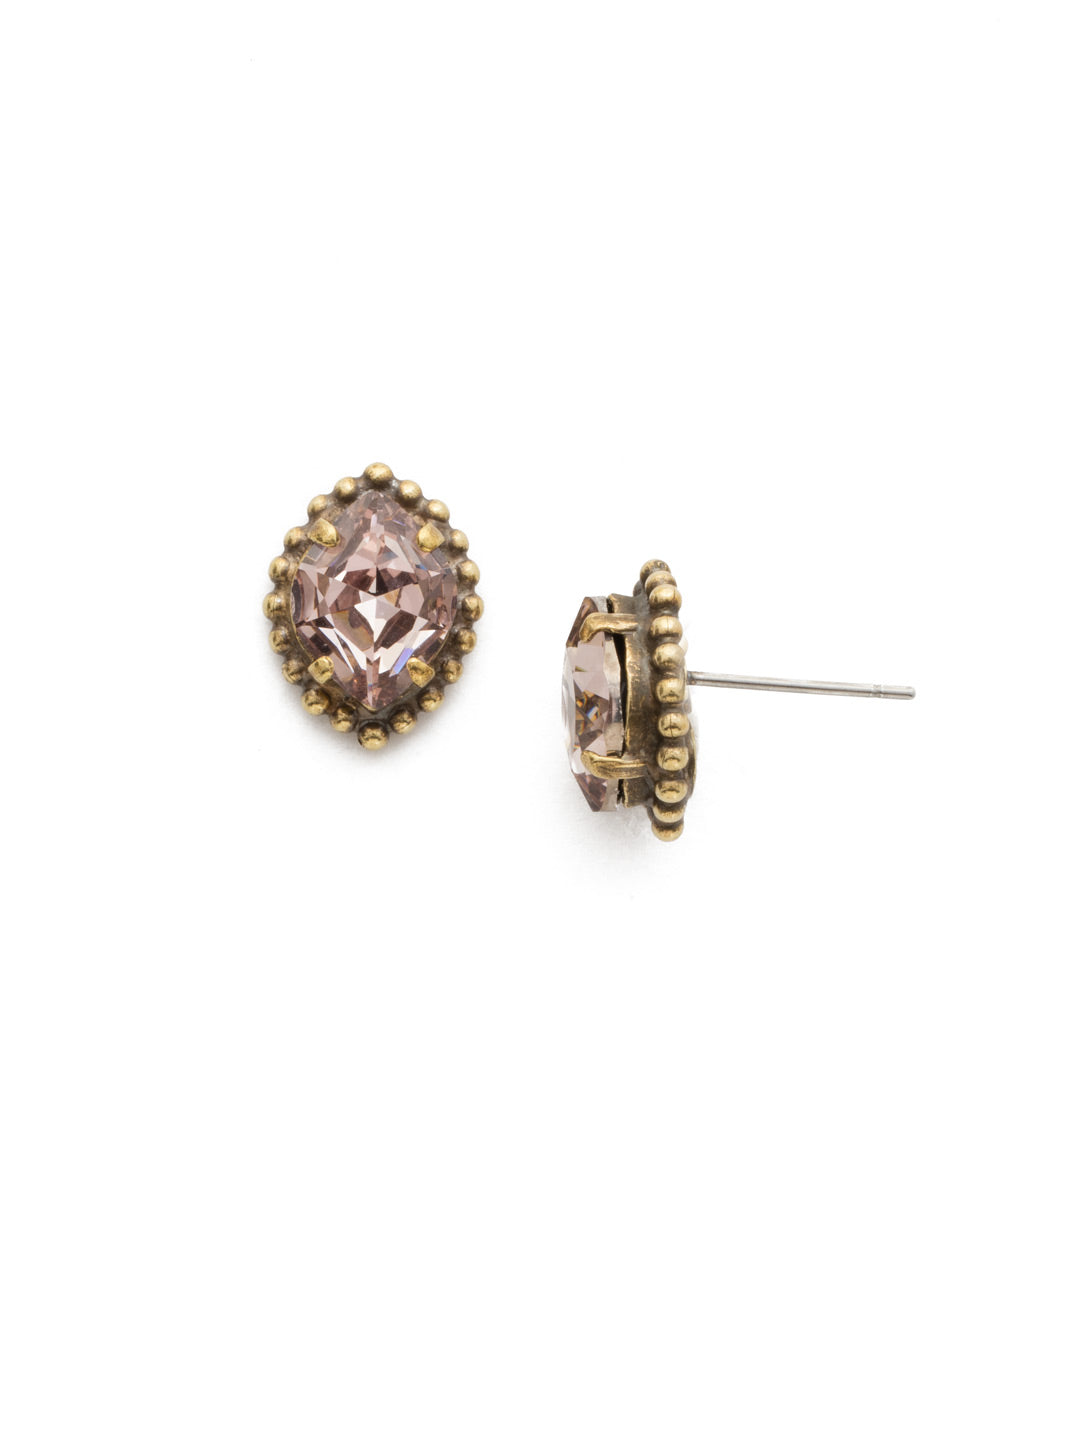 Quince Earring - EDS39AGRS - A single geometric crystal adorned with decorative metal edging is simple and chic.